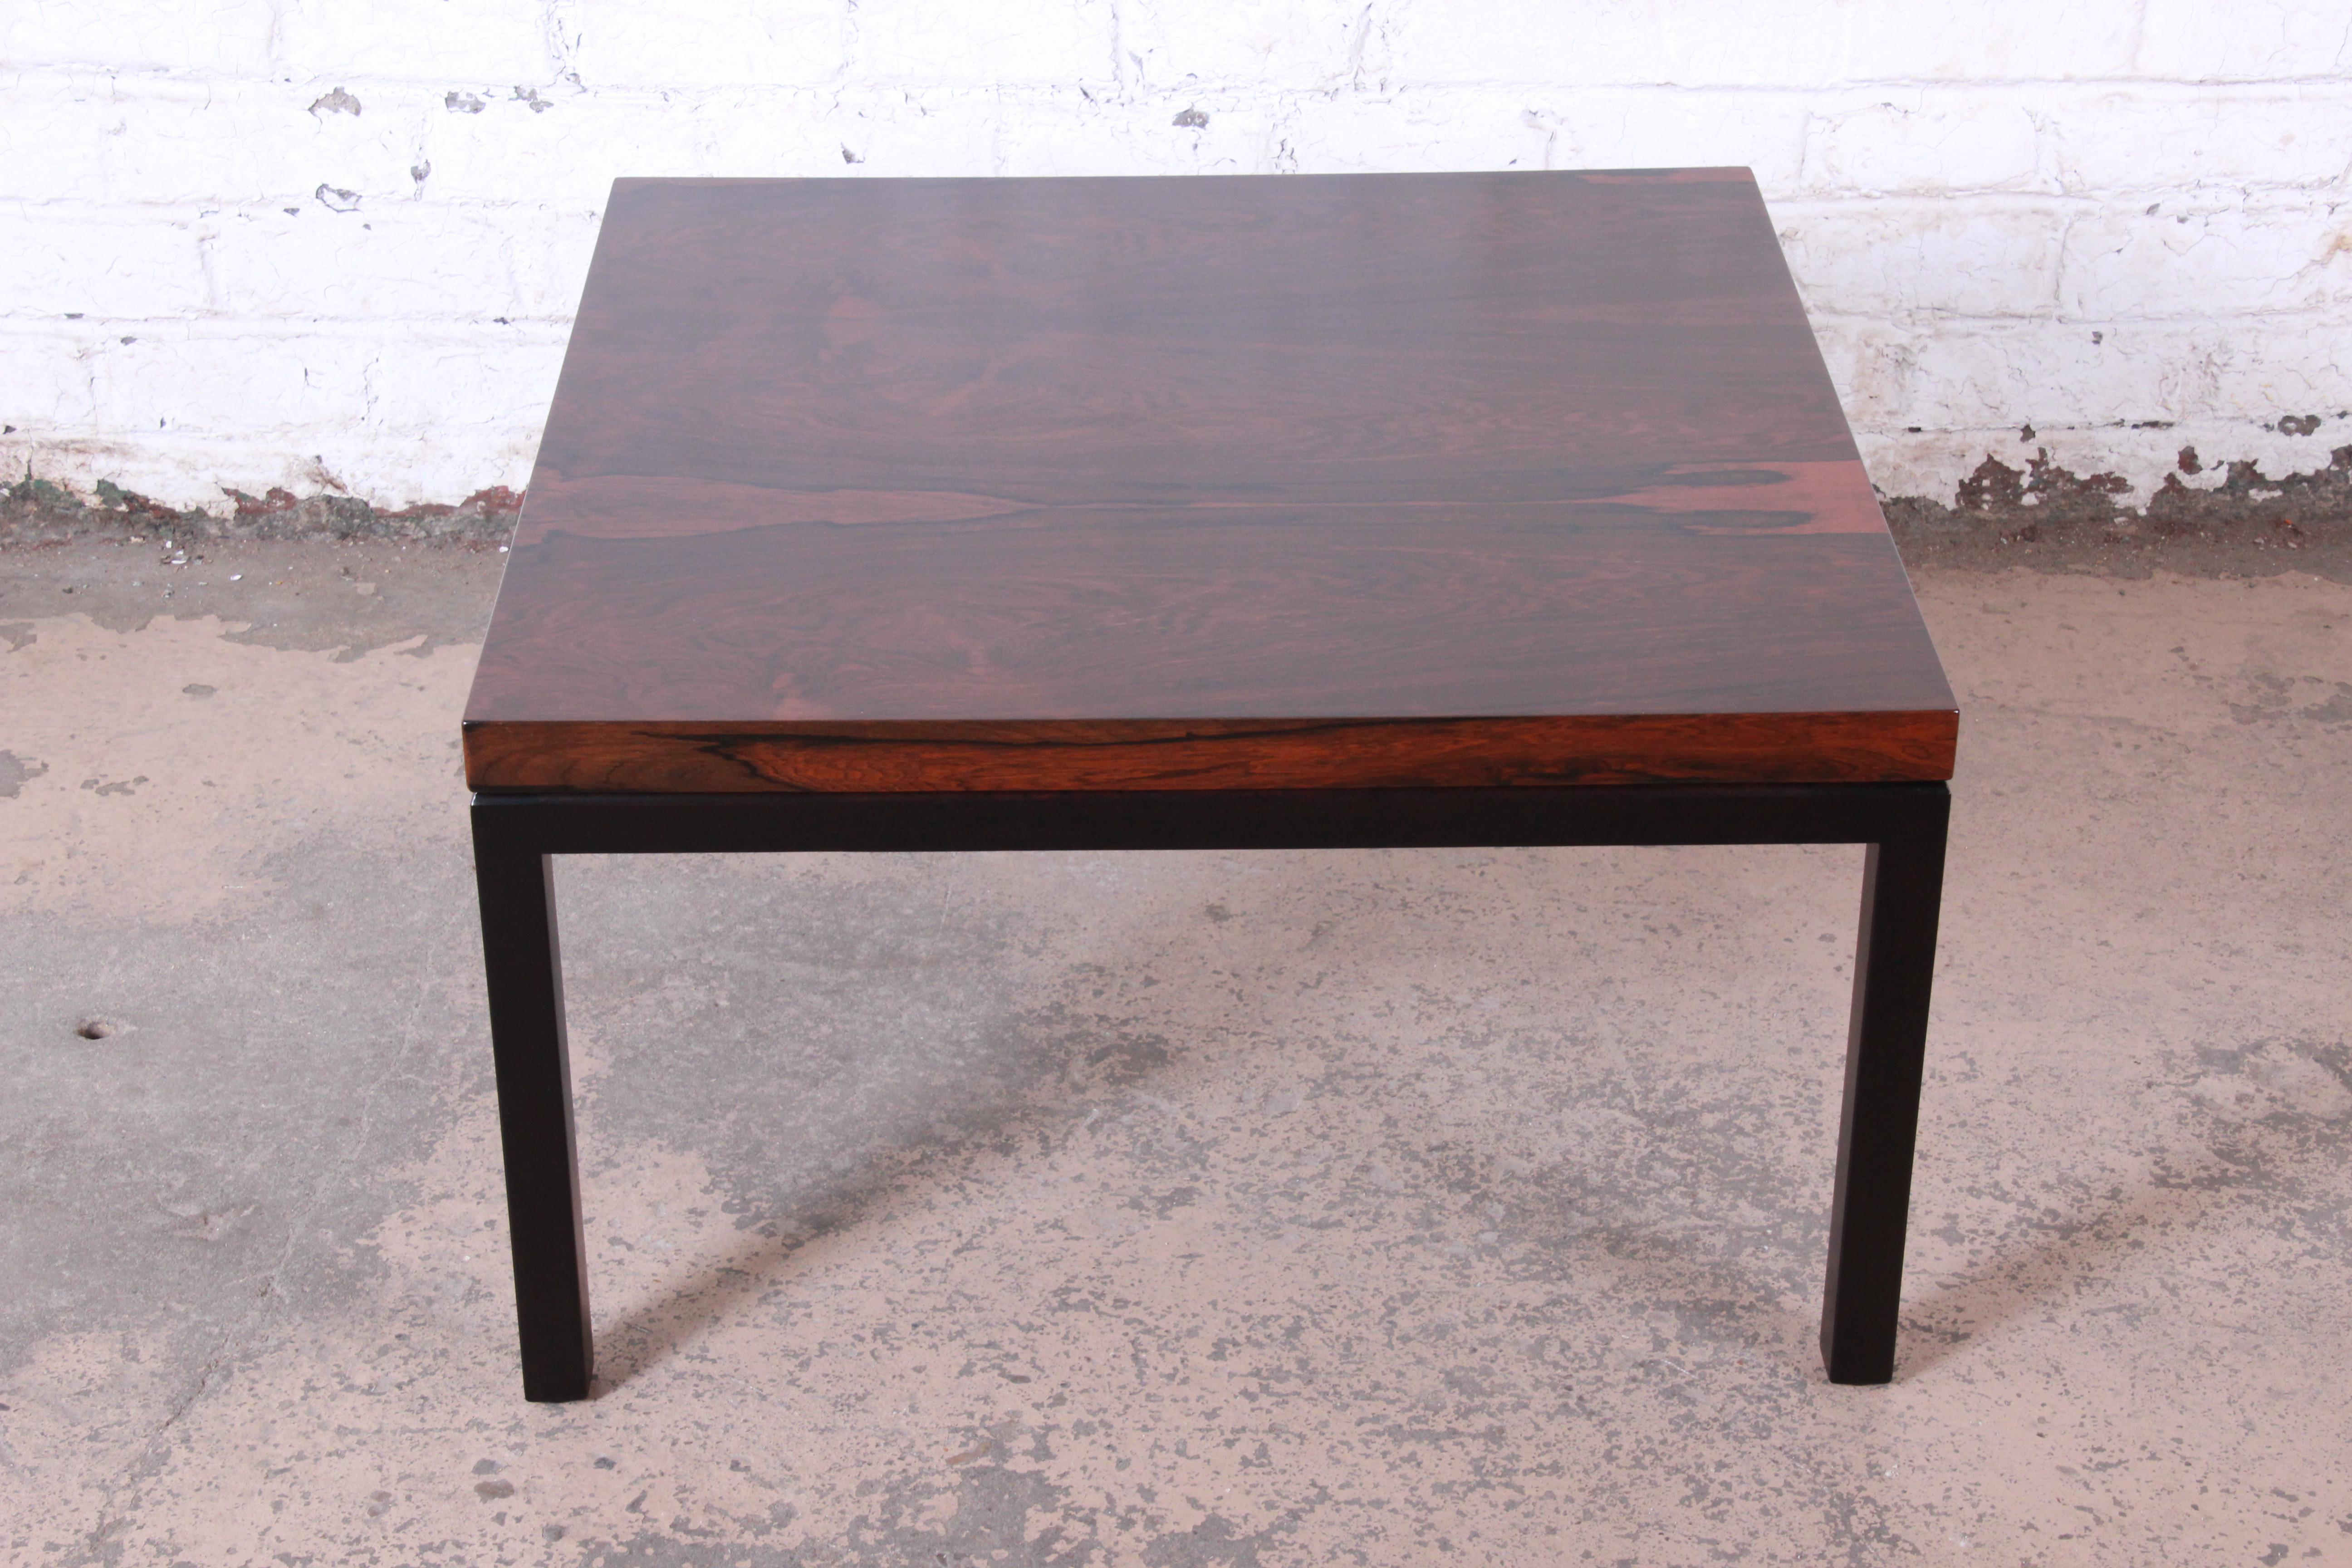 A gorgeous Mid-Century Modern rosewood coffee table designed by Milo Baughman for Thayer Coggin. The table features stunning wood grain on top and sleek ebonized wood legs. An outstanding example of Baughman's iconic design work. The original label